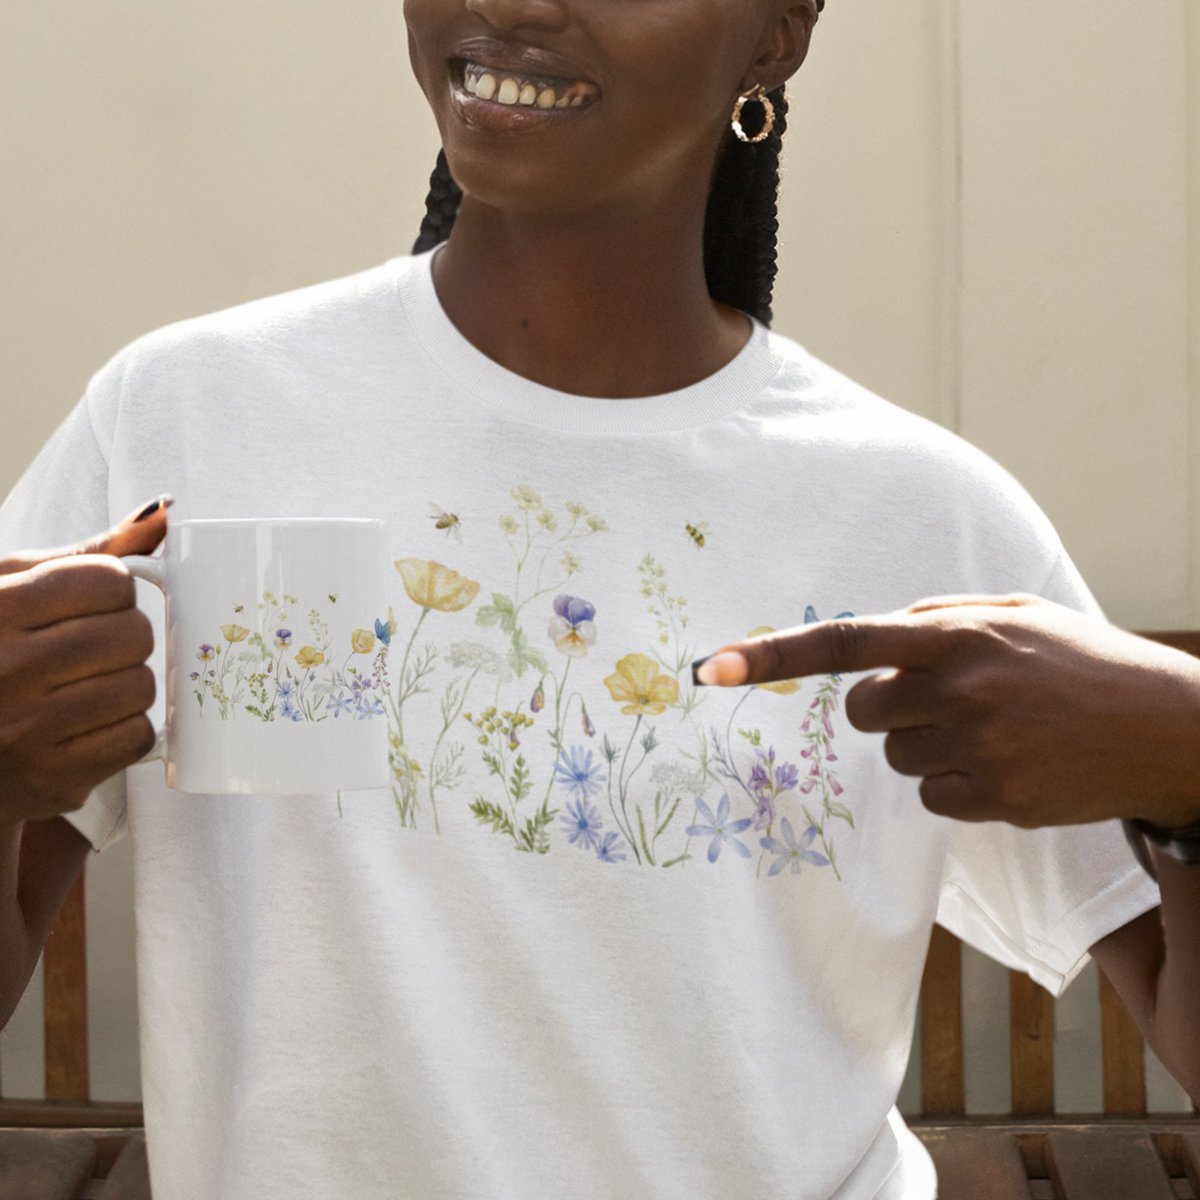 Wildflower meadow is now available as a mug and tshirt.

onthewildsidedesign.etsy.com/listing/173049…

#UKGiftHour #UKGiftAM #shopindie